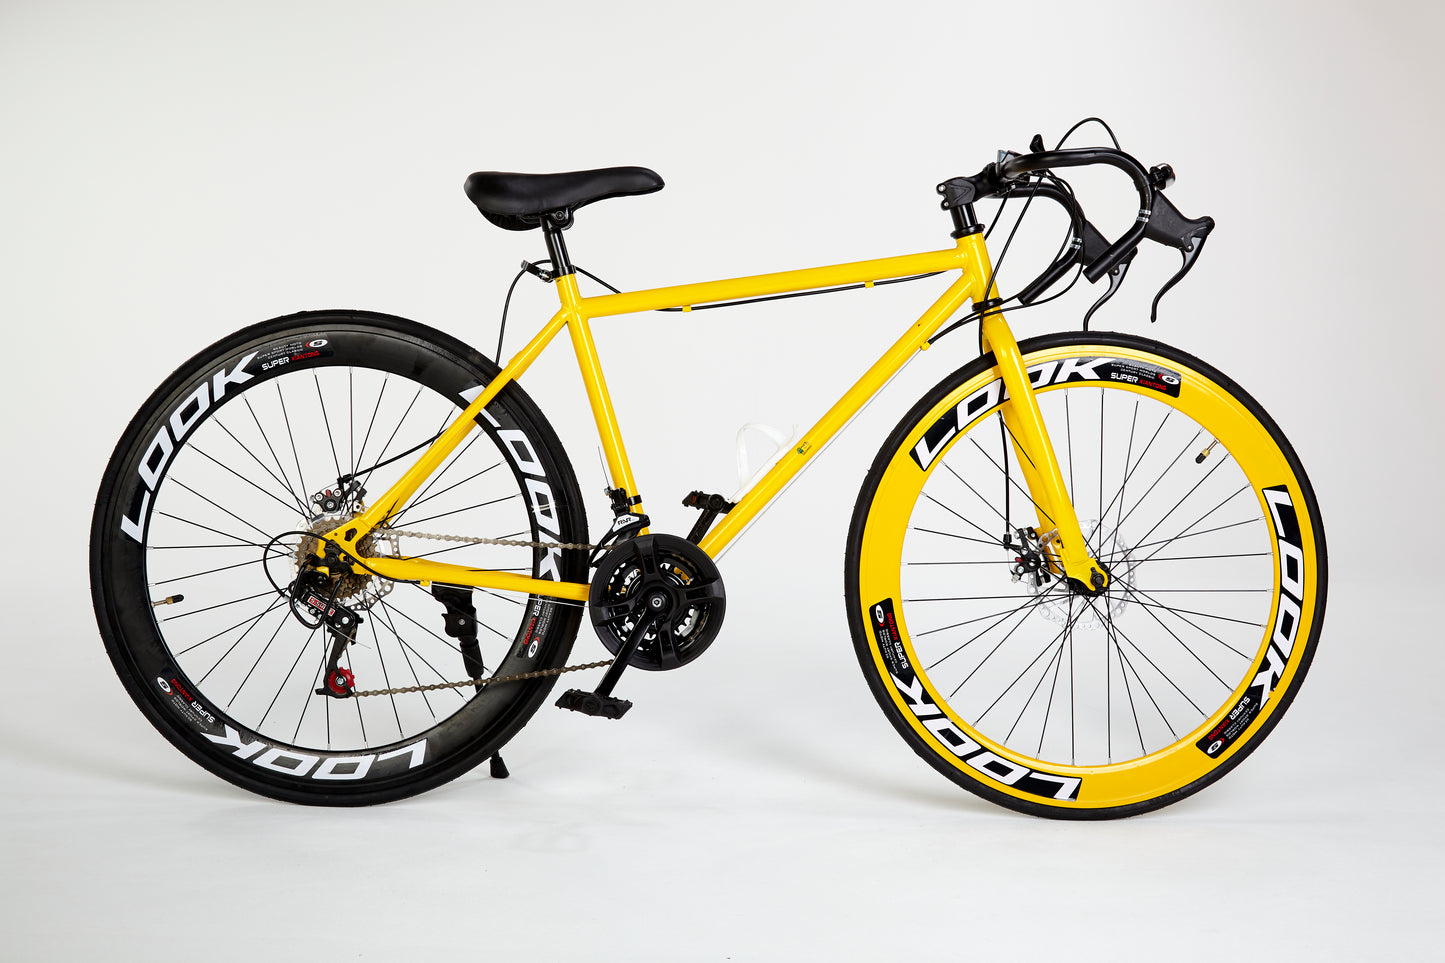 Bid on YELLOW STREET BIKE WITH 21 GREAR, BRAKE DISKS, KICK STAND, COOL THIN TYRES- Buy &amp; Sell on Auction with EAMA Group